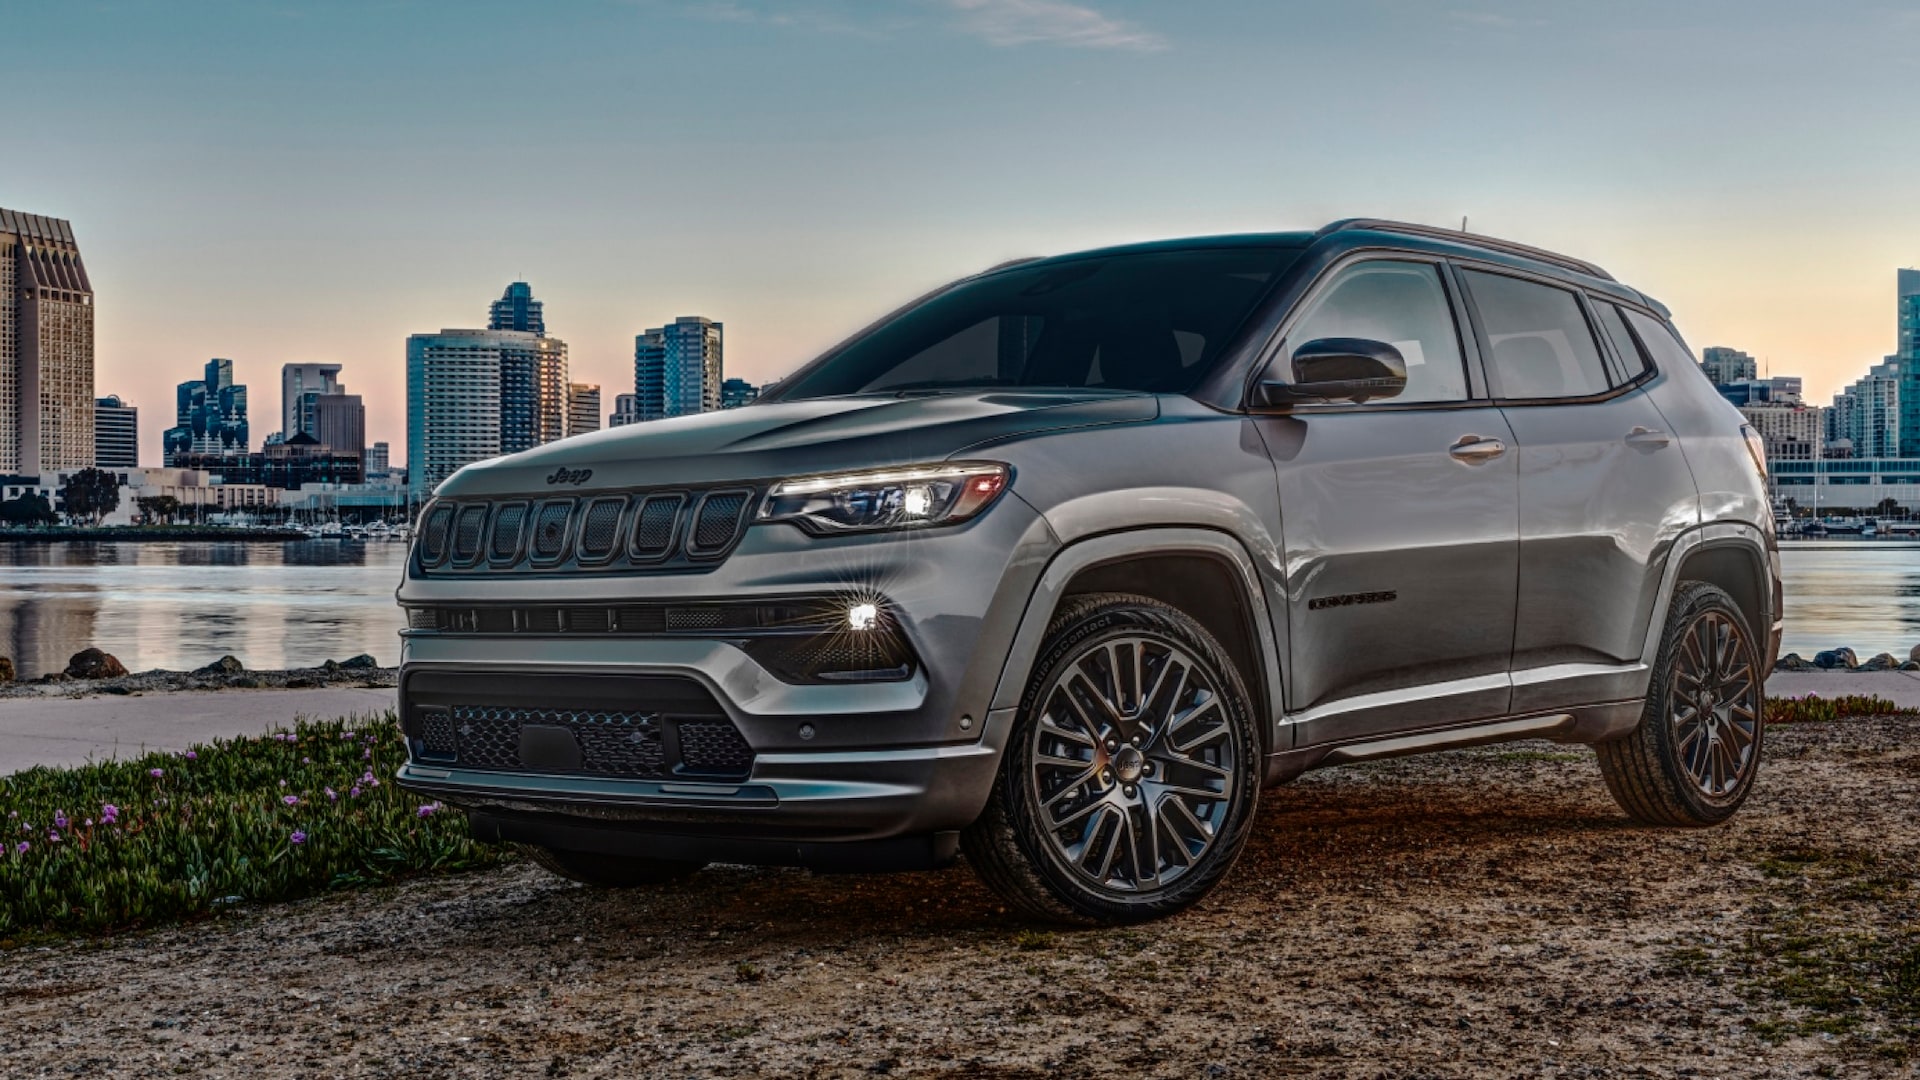 2022 Jeep Compass Prices, Reviews, and Photos - MotorTrend